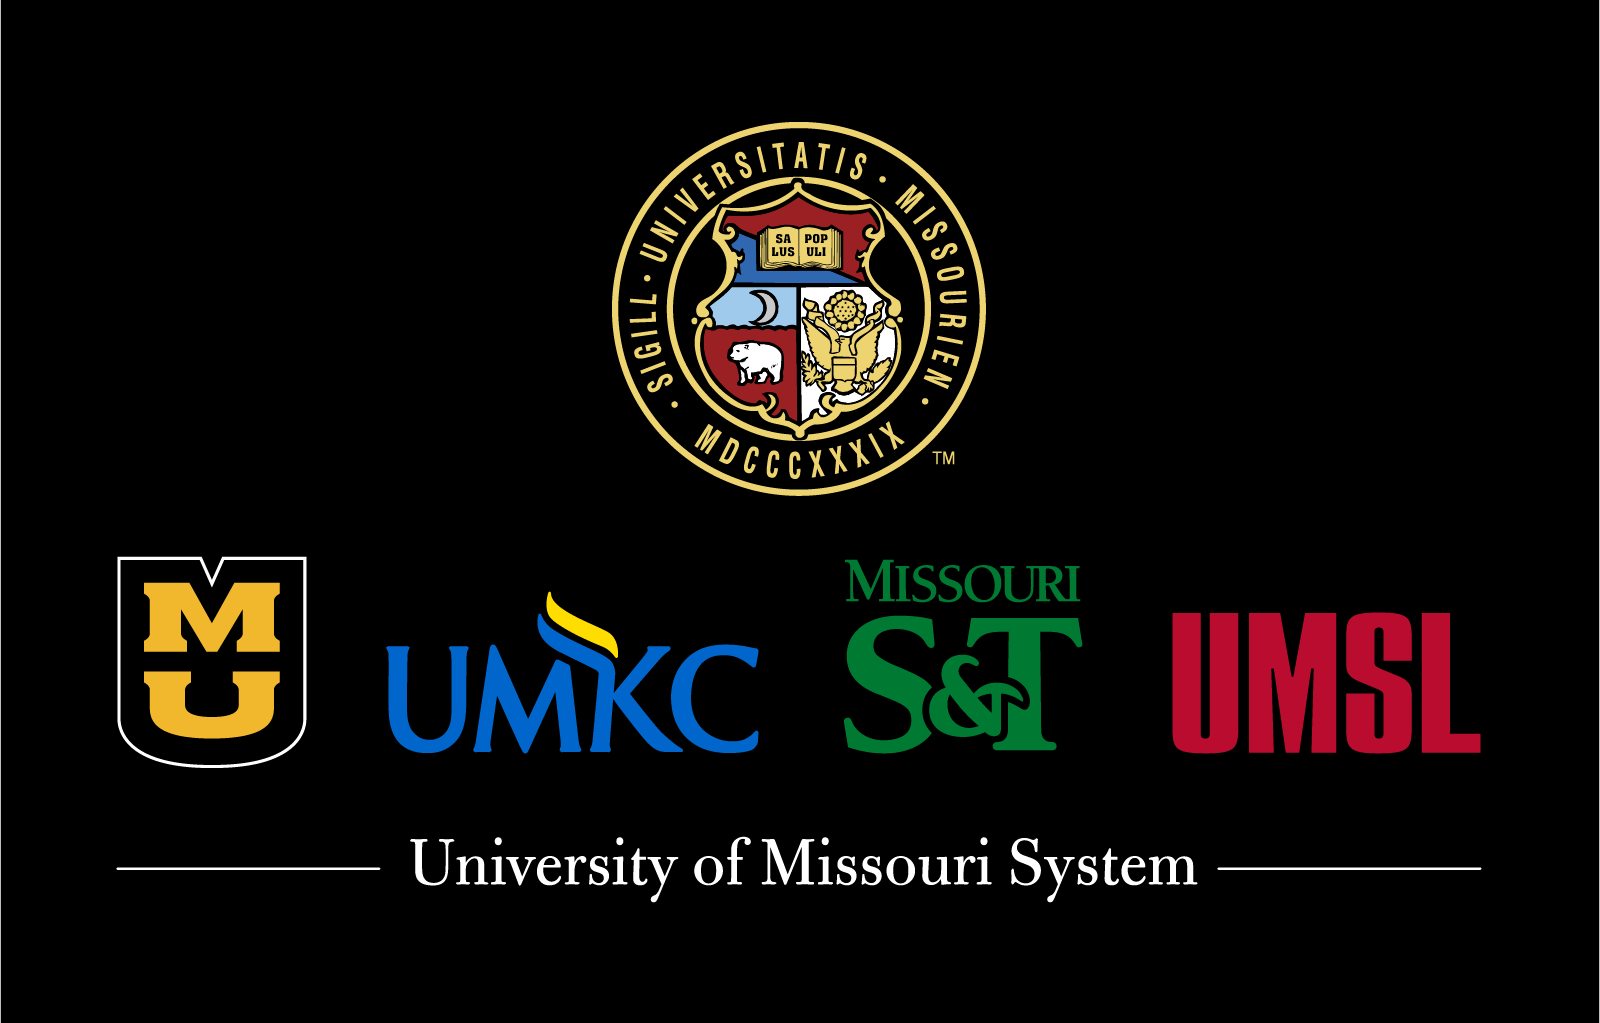 Vertical UM System logo lockup with the UM Seal above all four campus logos: University of Missouri-Columbia, University of Missouri-Kansas City, Missouri Science and Technology, University of Missouri-St. Louis